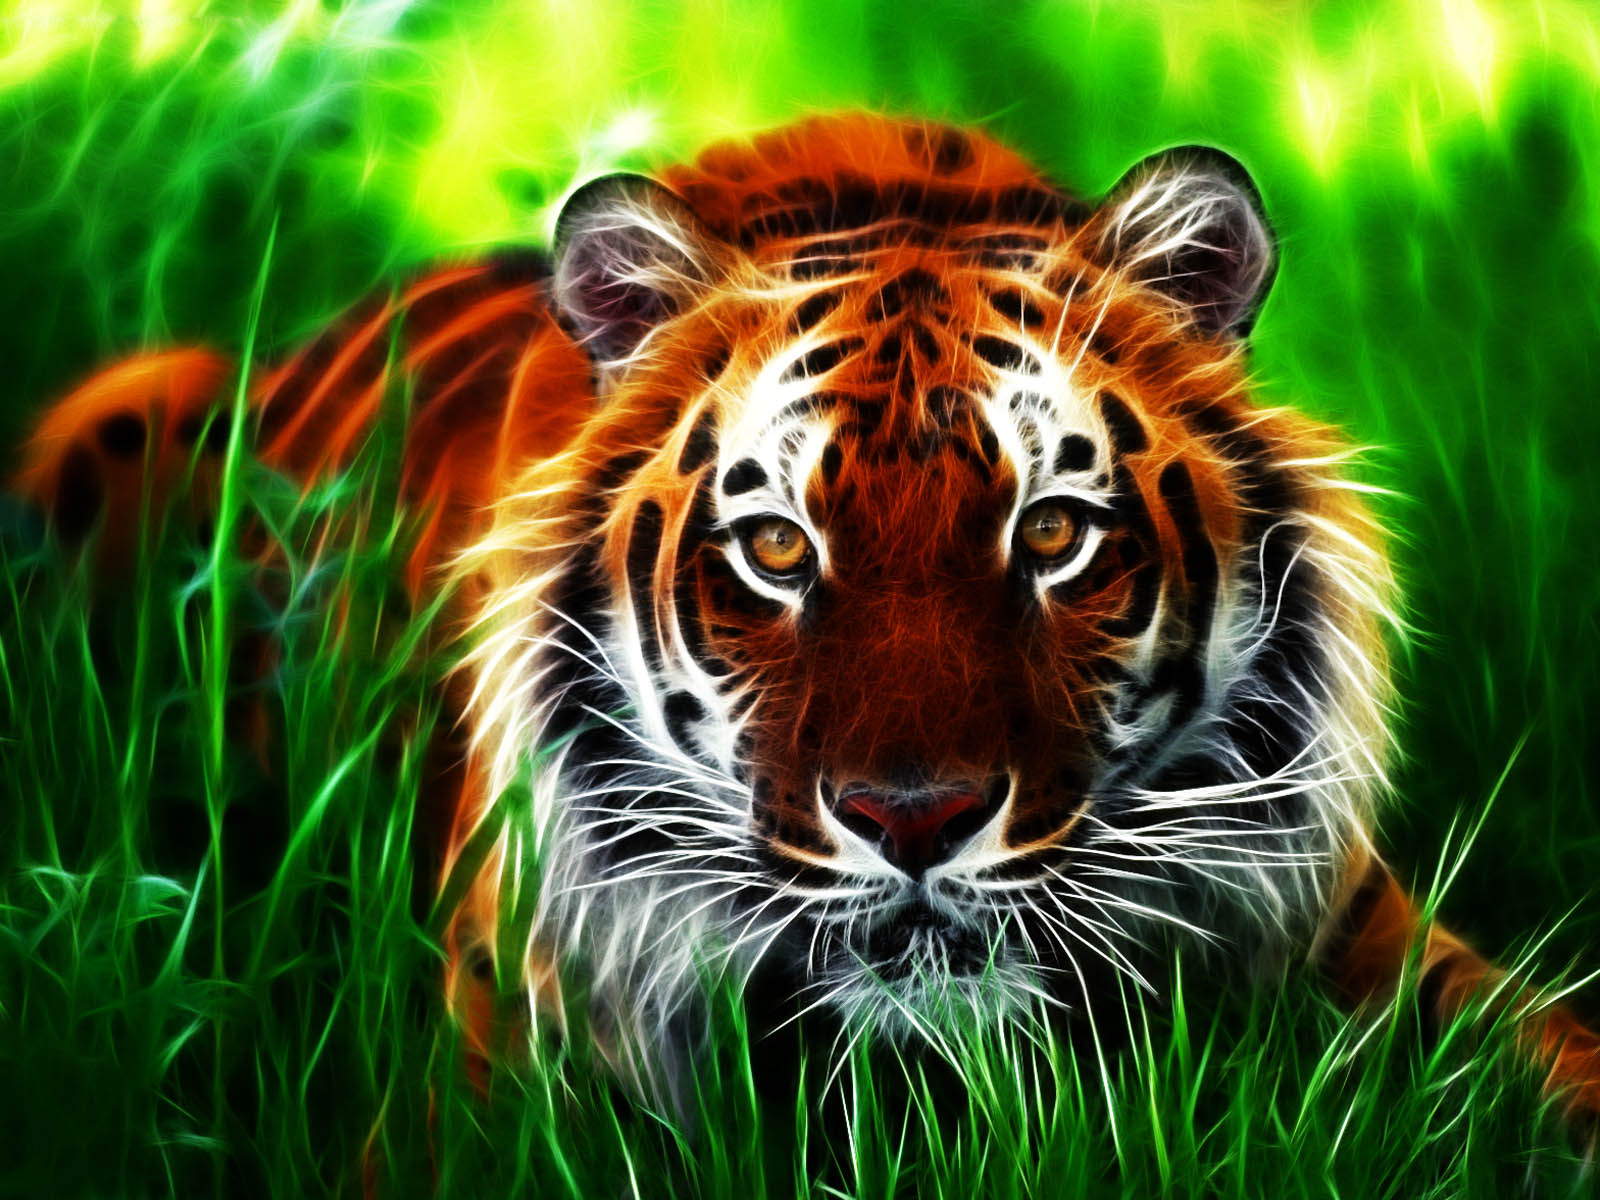 Tiger Wallpapers, HD Tiger Backgrounds, Free Images Download